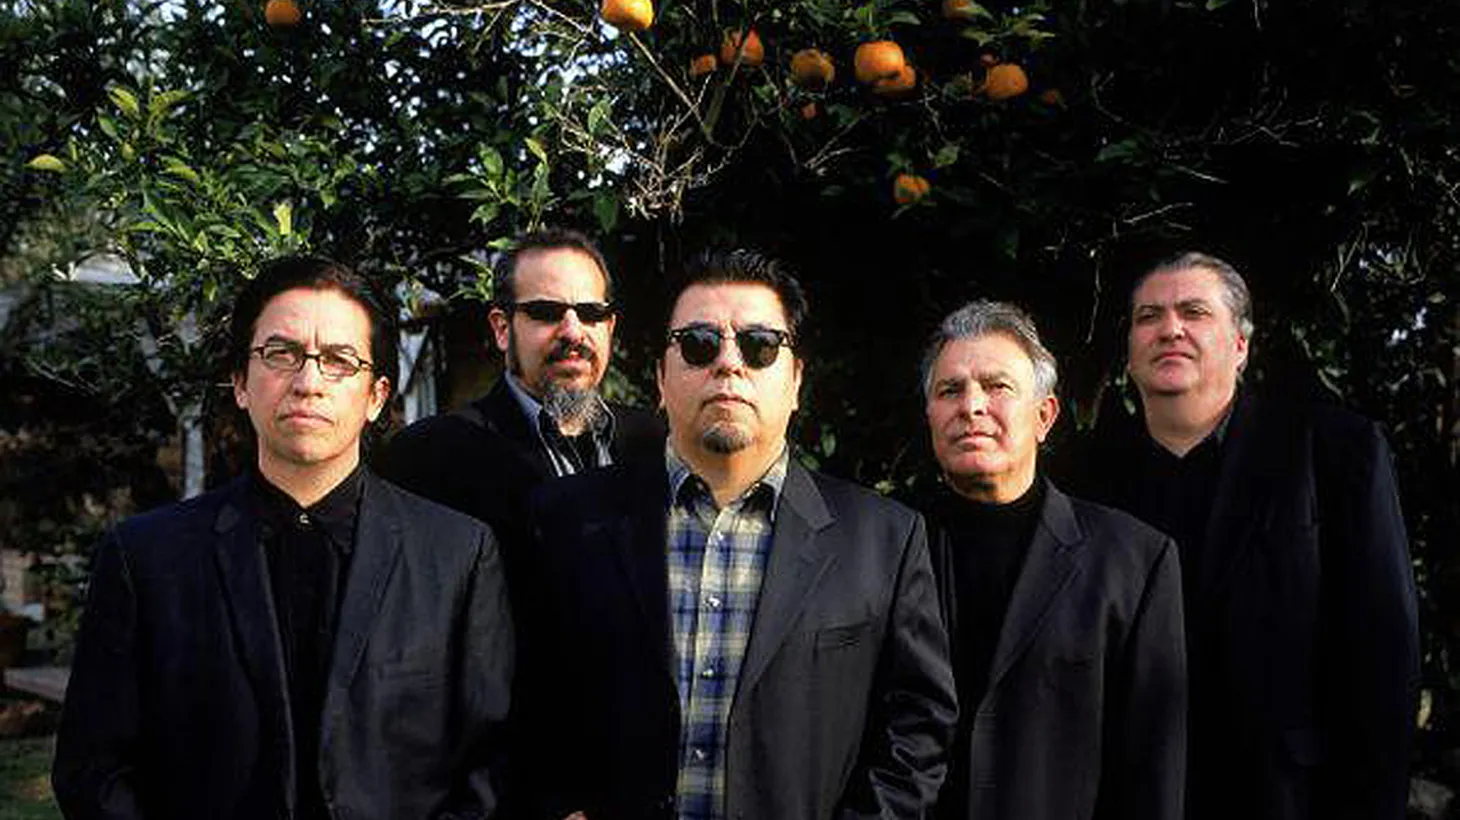 East L.A.'s Los Lobos celebrate the 20th anniversary of their recording Kiko by performing it in its entirety...